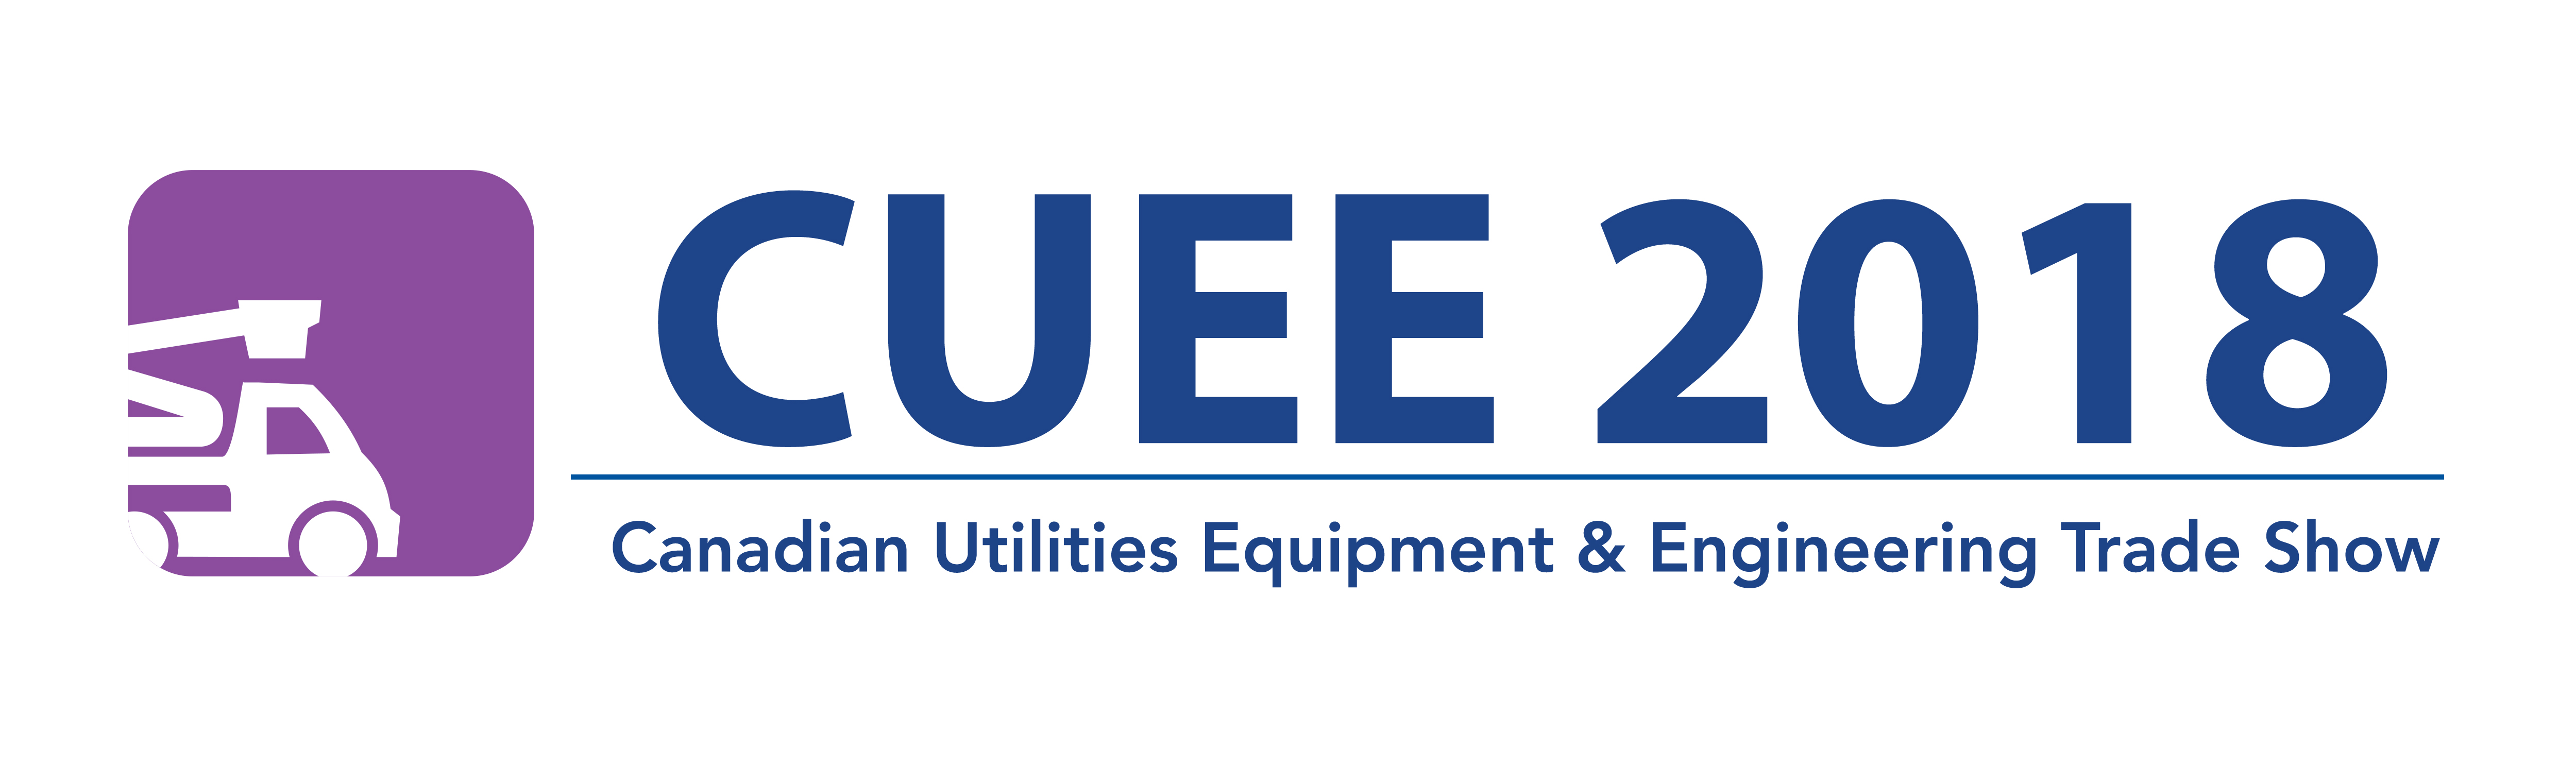 LTL will be at CUEE 2018